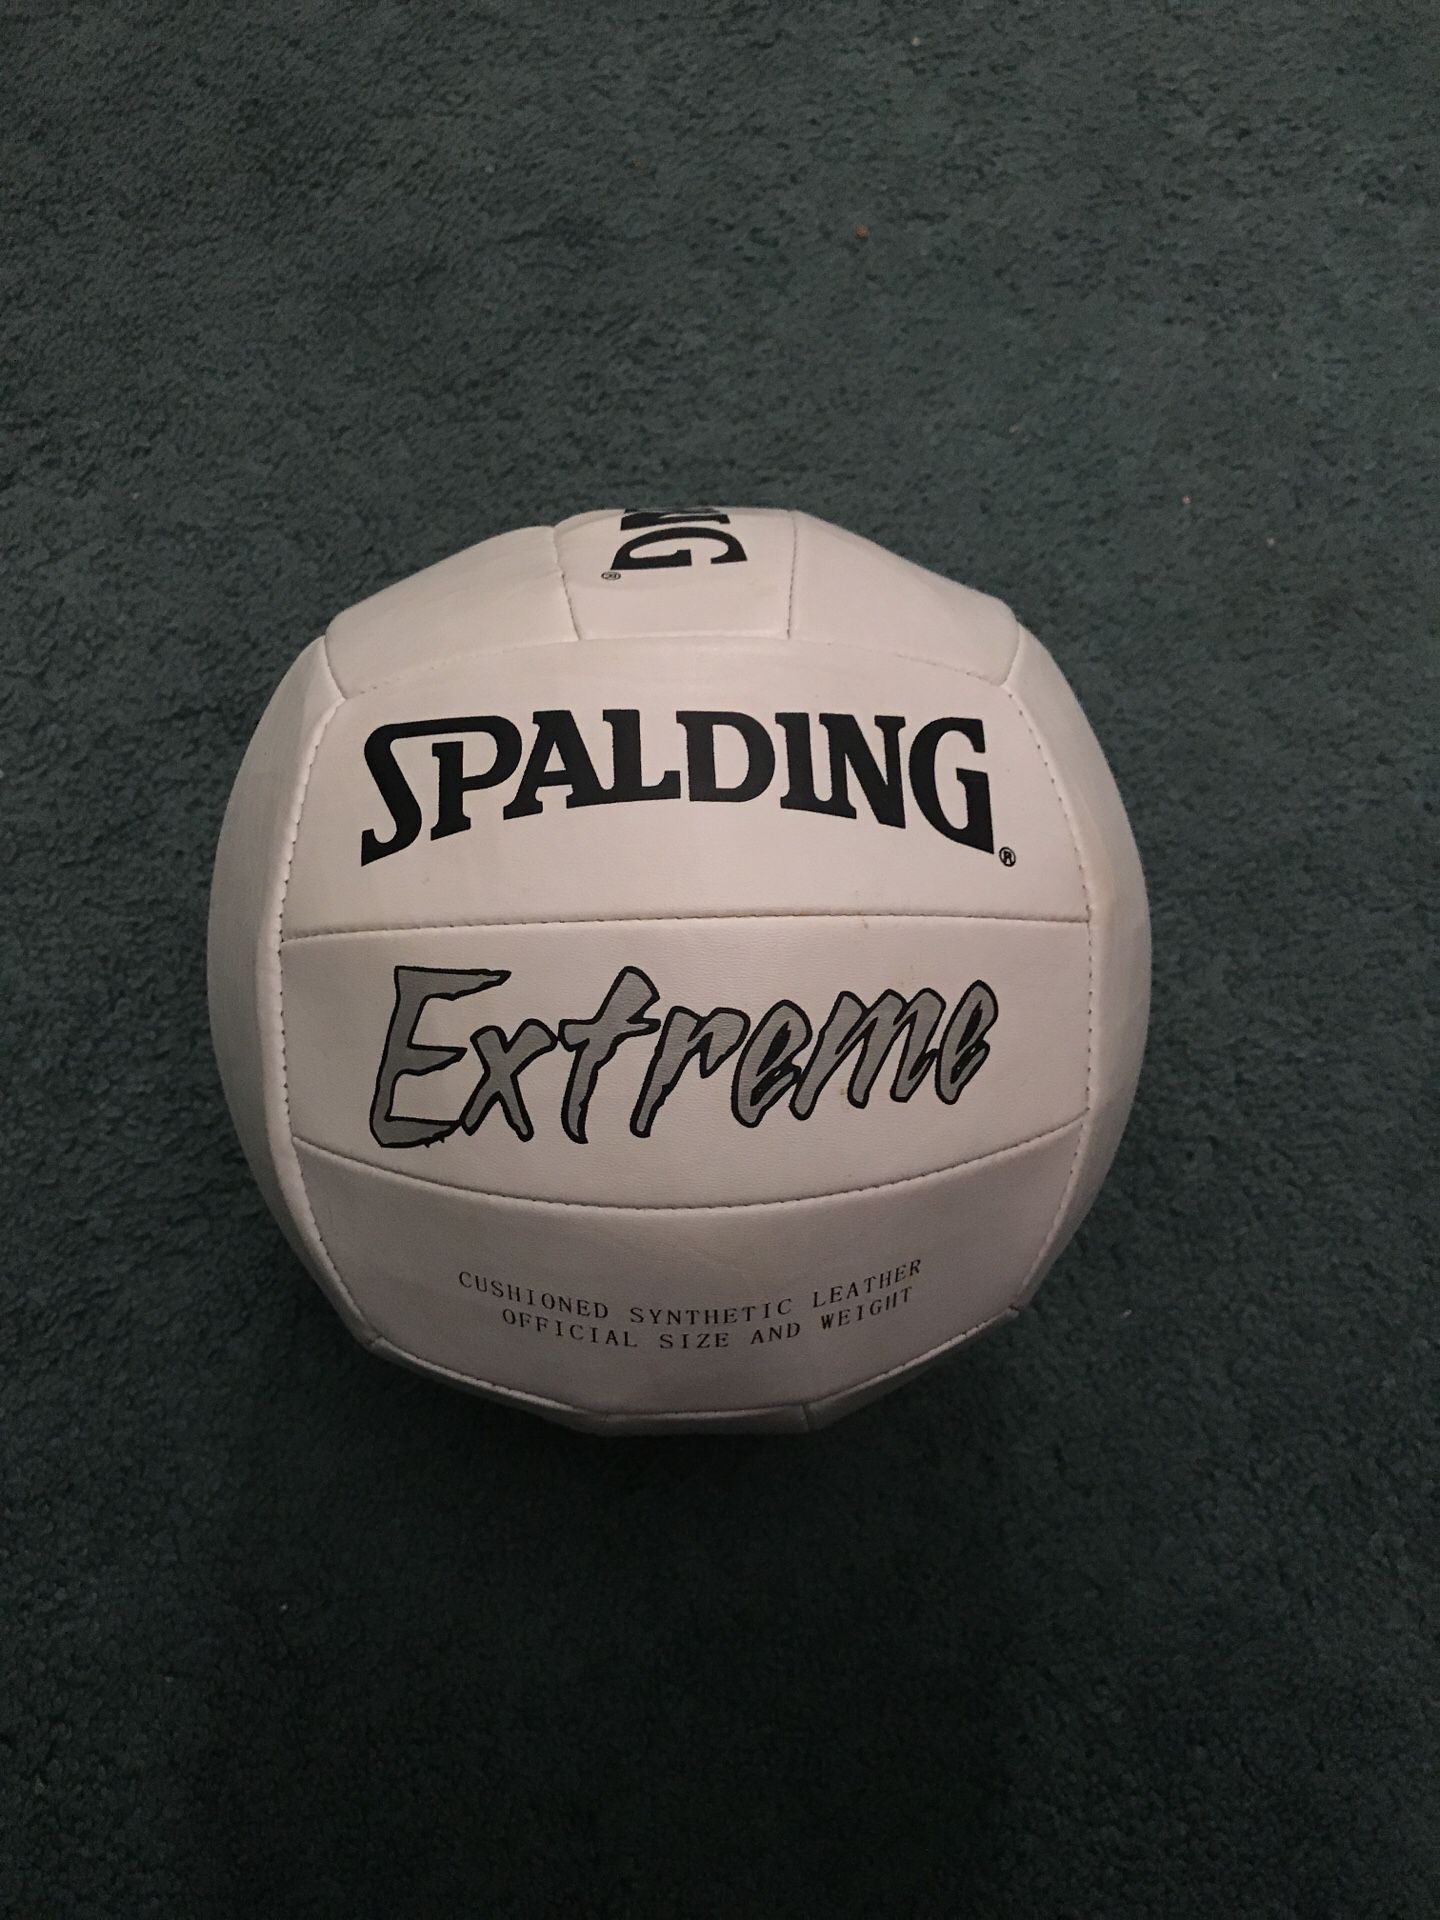 New Spalding Extreme volleyball.